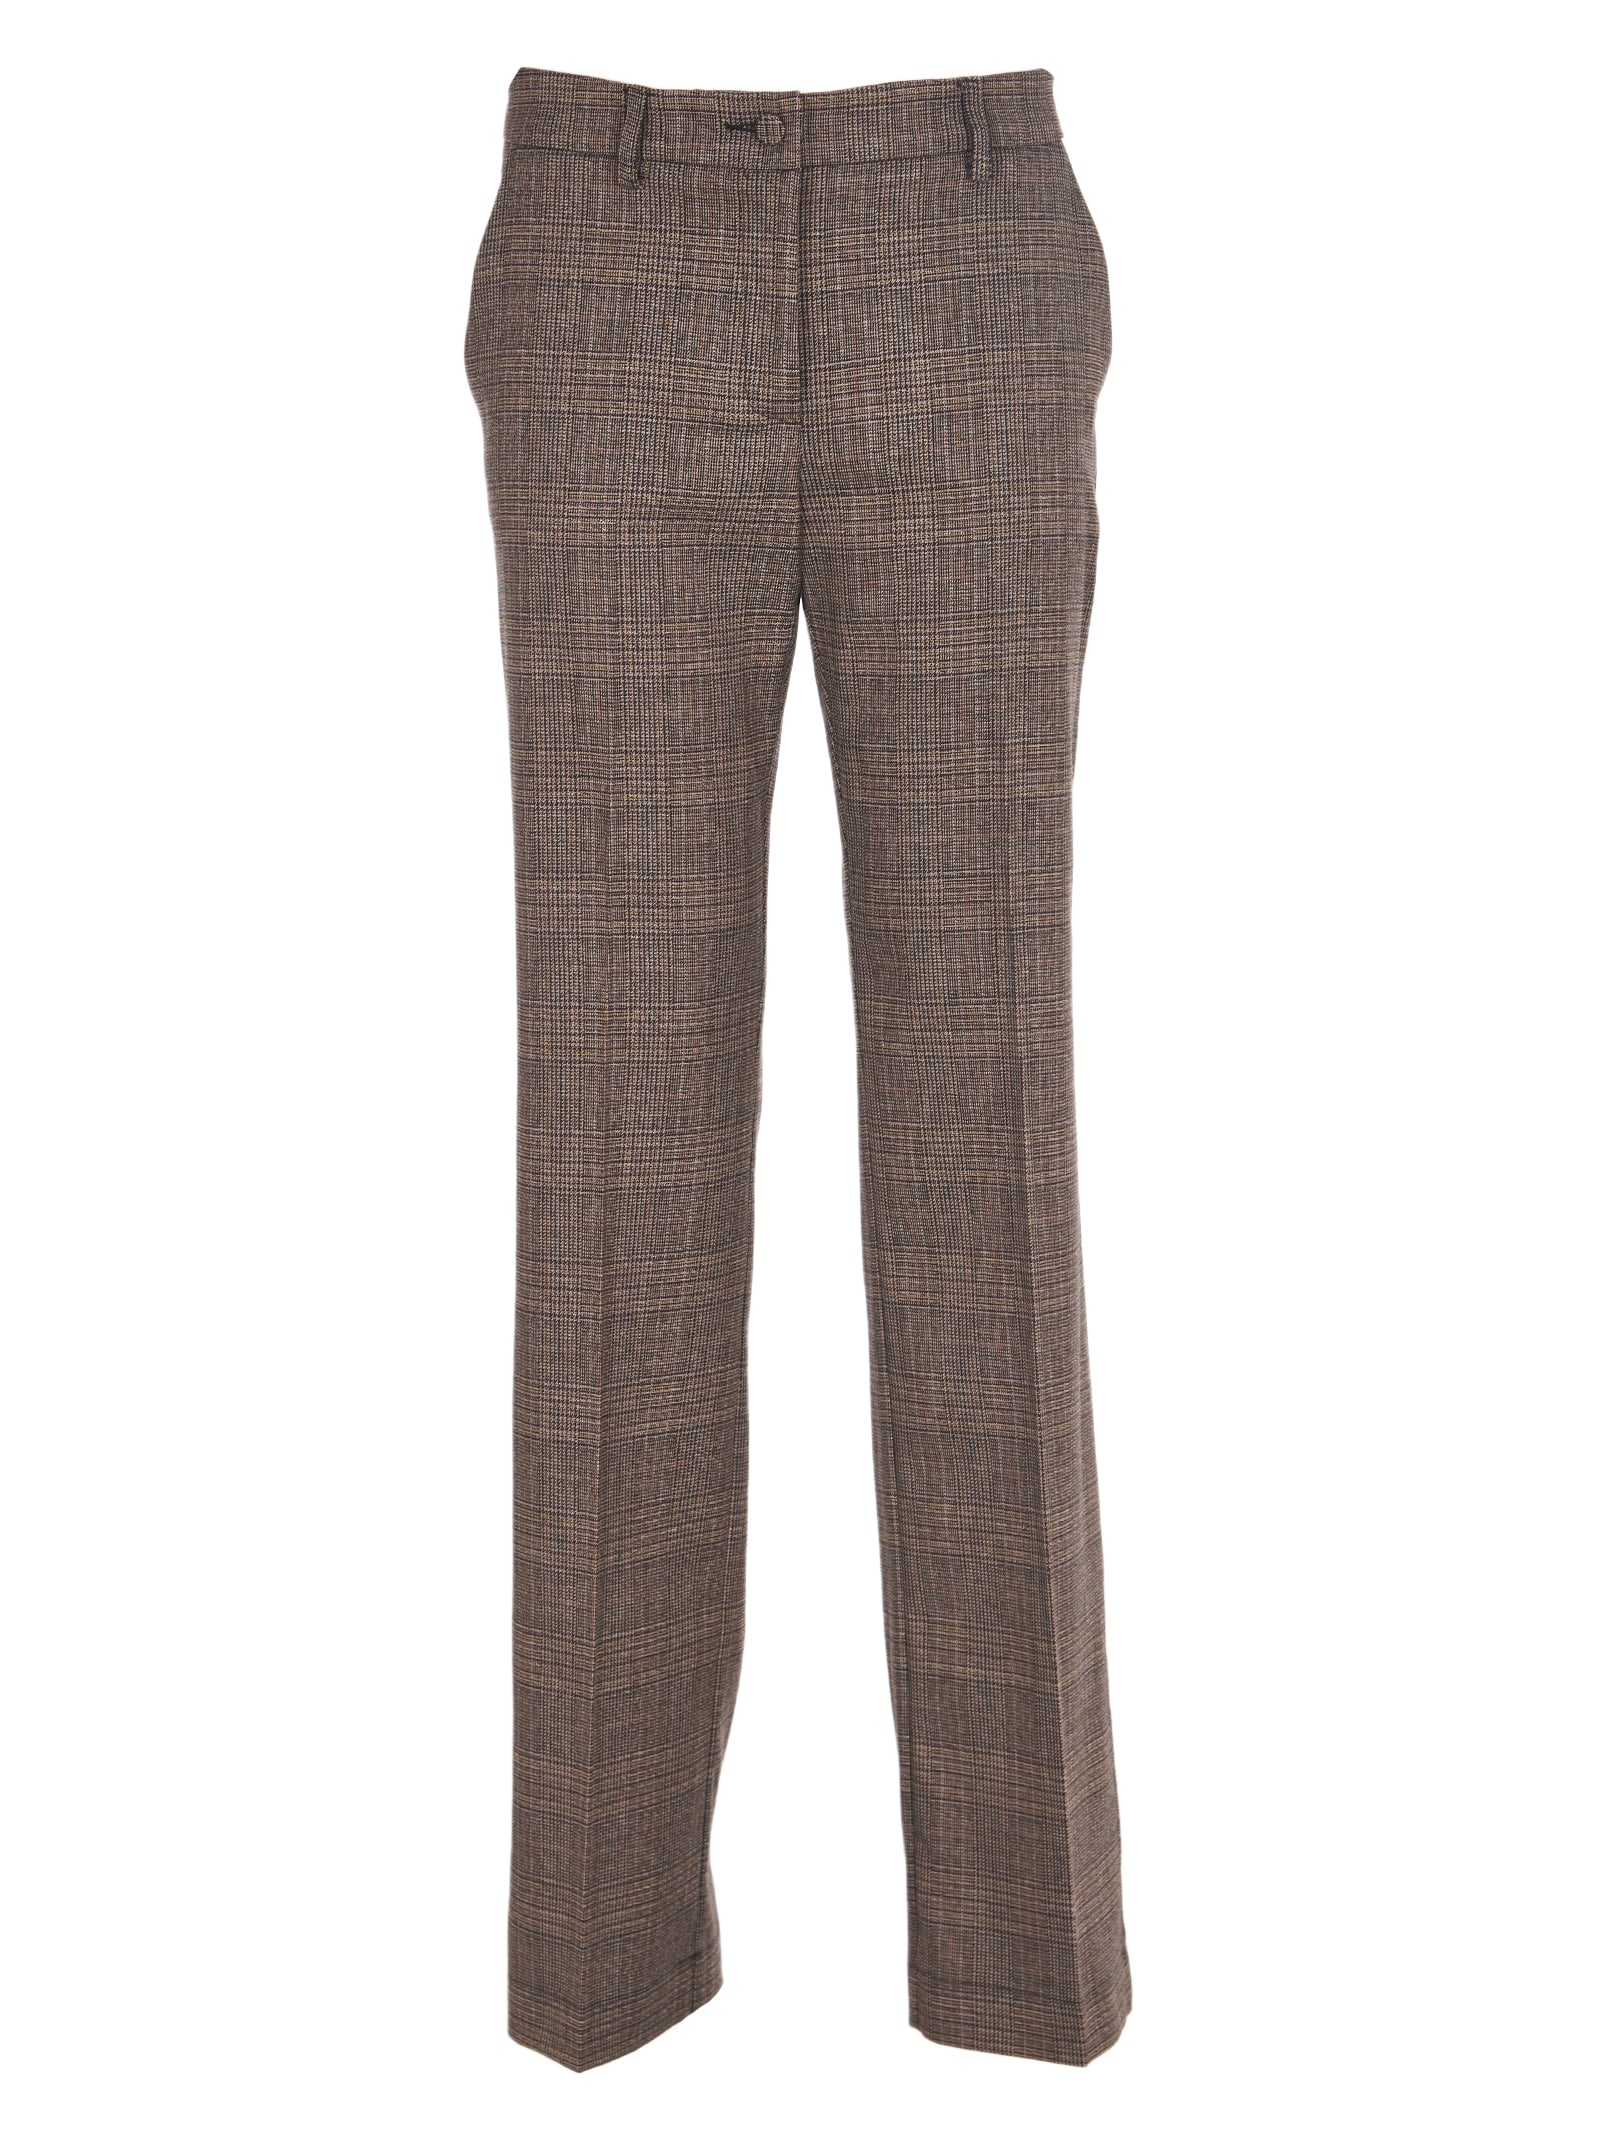 Hebe Studio Princes Of Wales Trousers